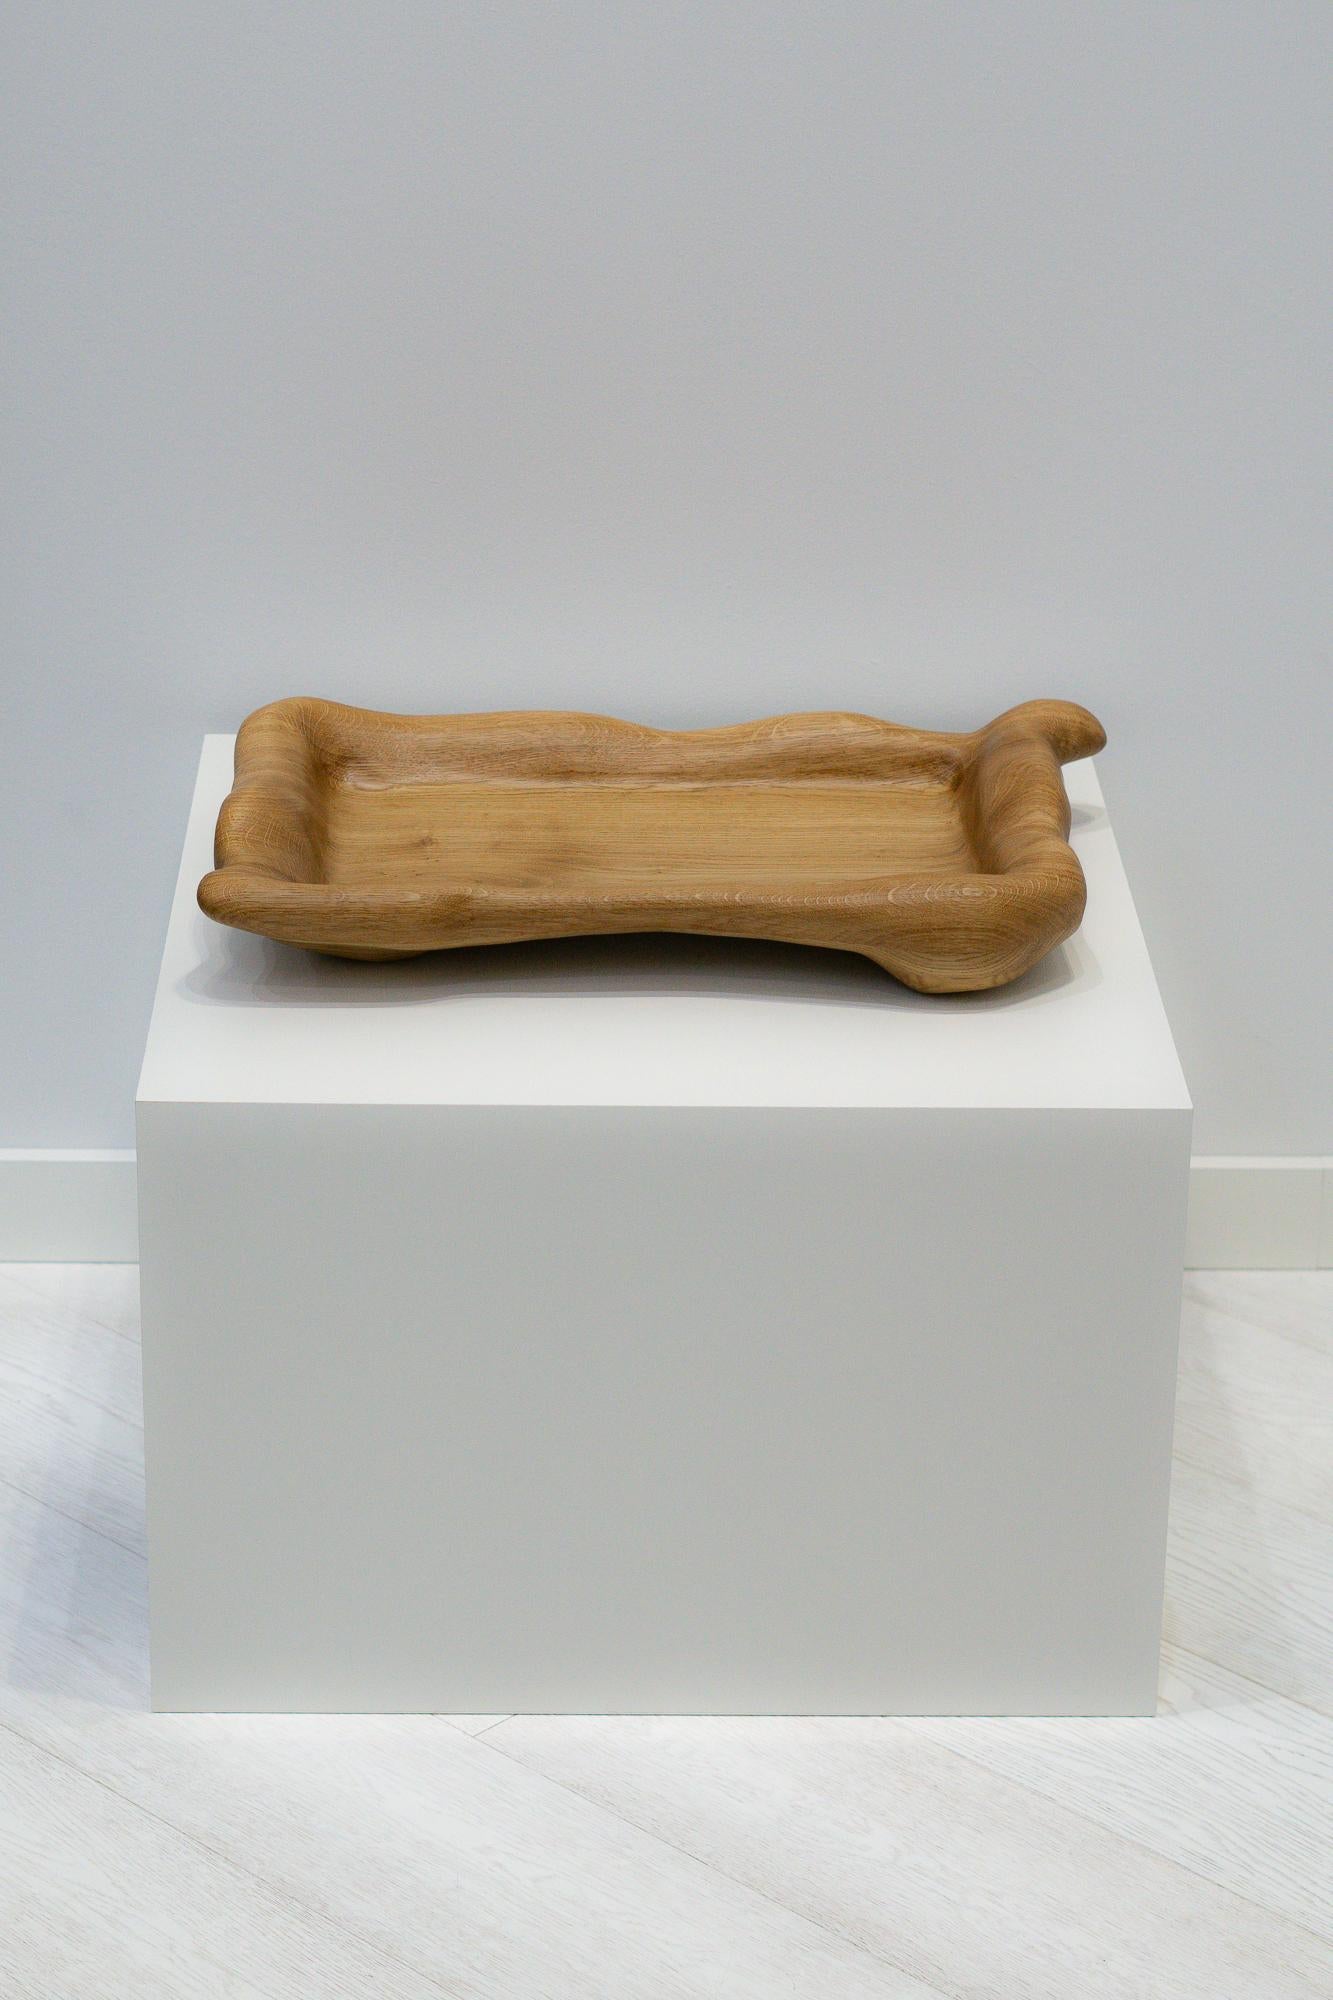 Sculptural Serving Tray in Oak Wood In New Condition For Sale In Aach, DE